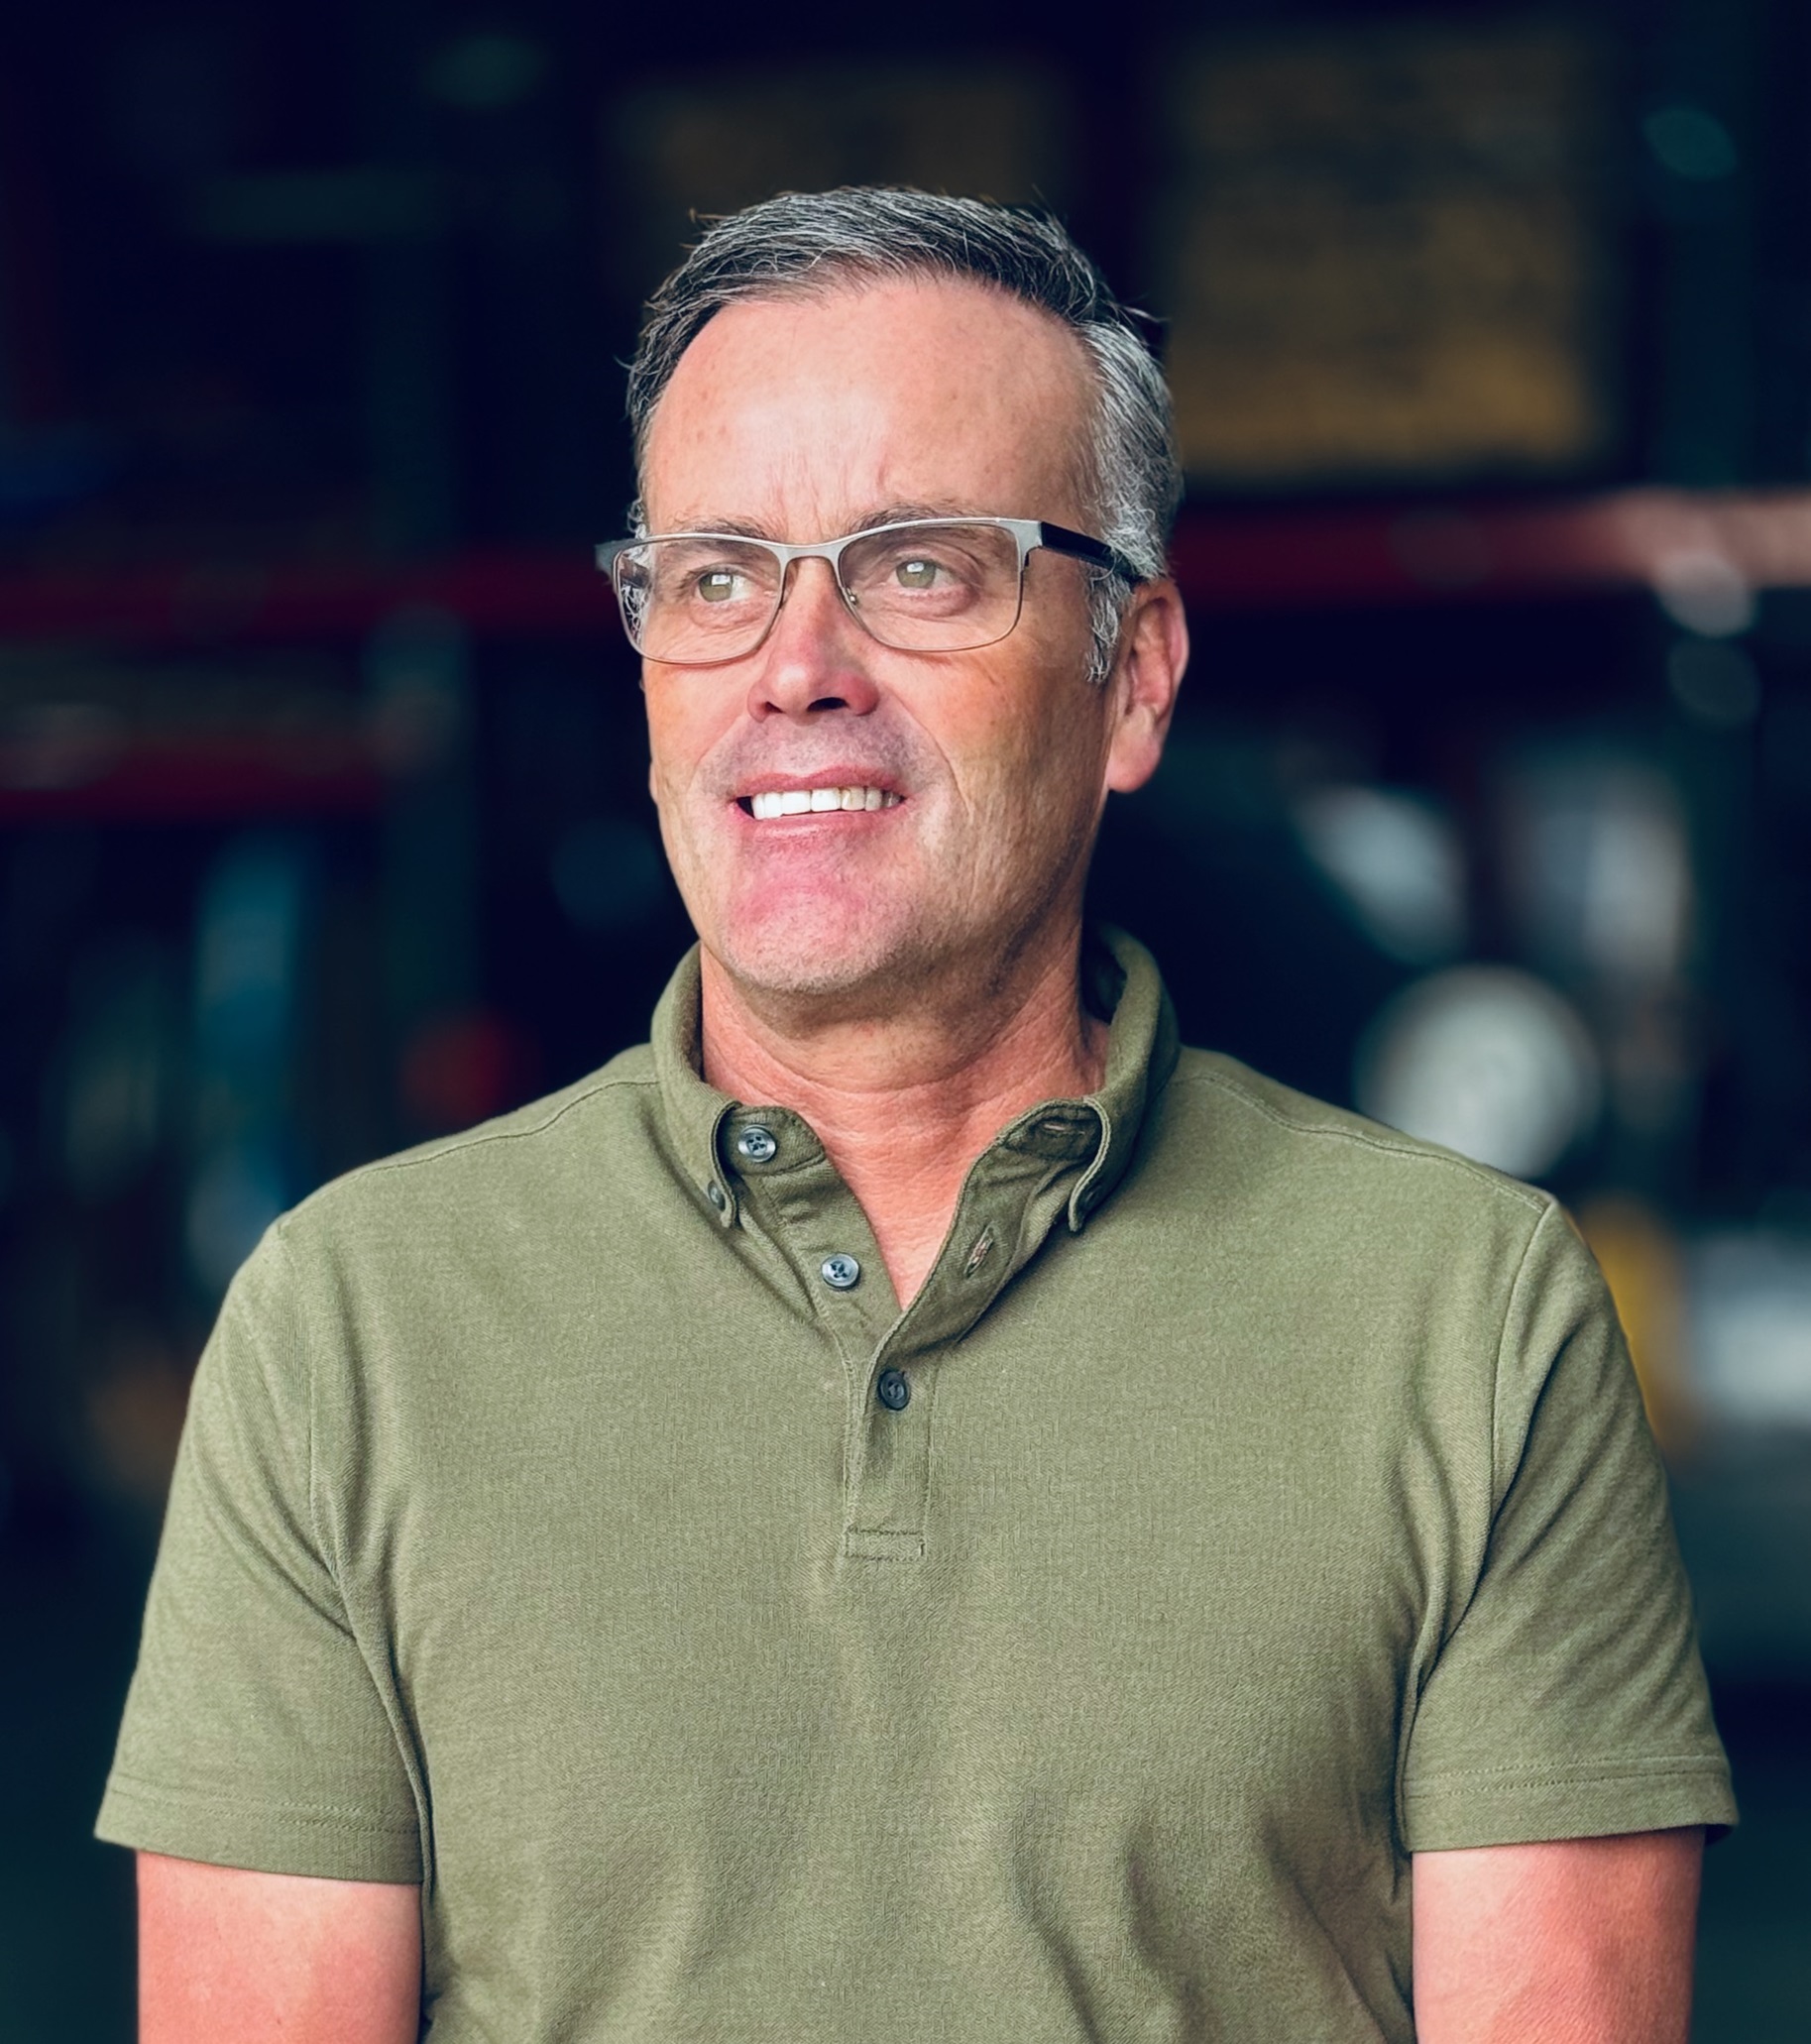 iQ Power Tools, manufacturer of premium power tools with integrated dust collection systems, has announced Scott Craft as the newly appointed general manager at the company’s California Headquarters.